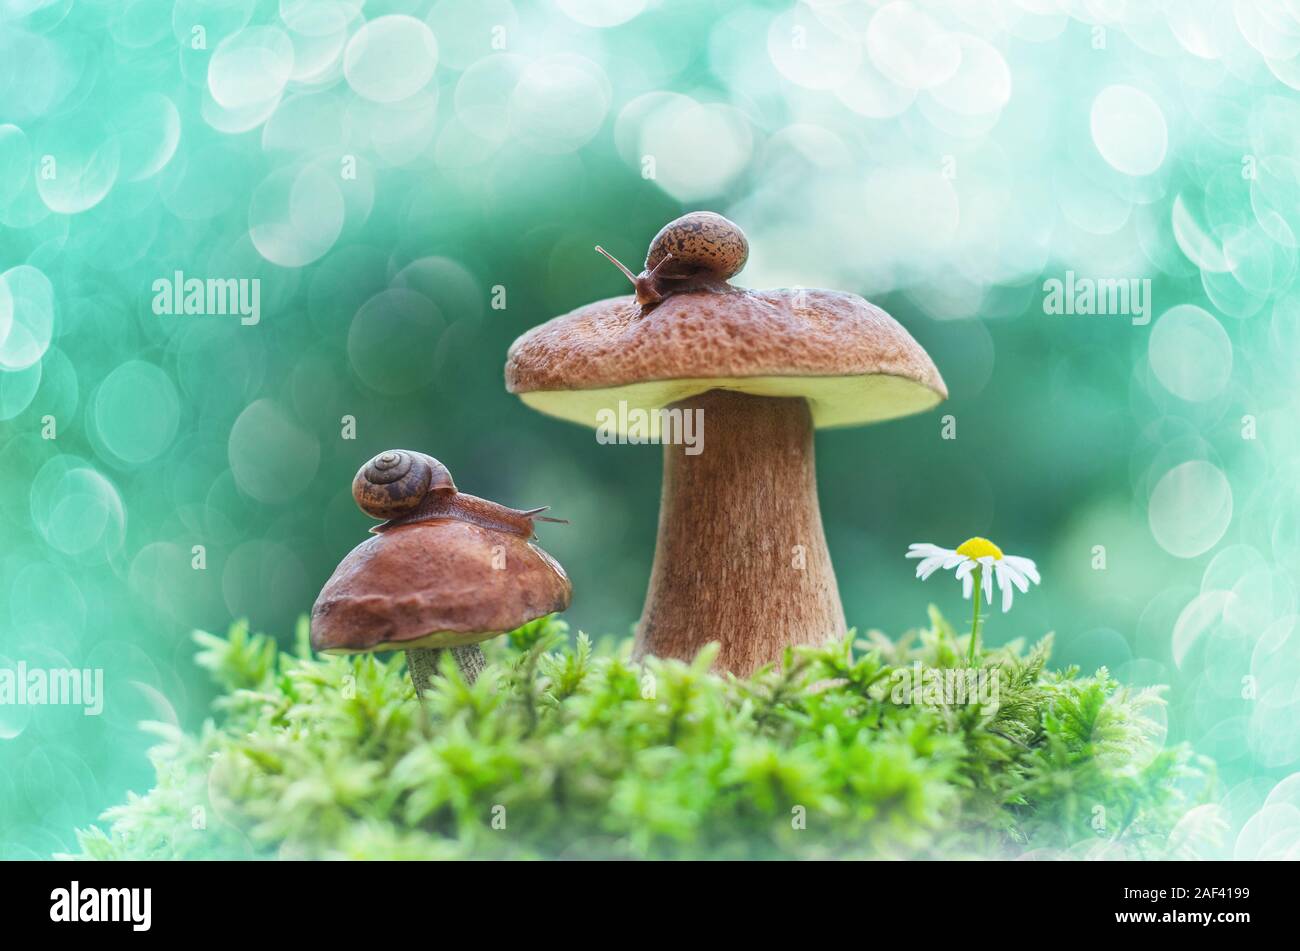 Snails sitting on white mushrooms on a natural background. Stock Photo